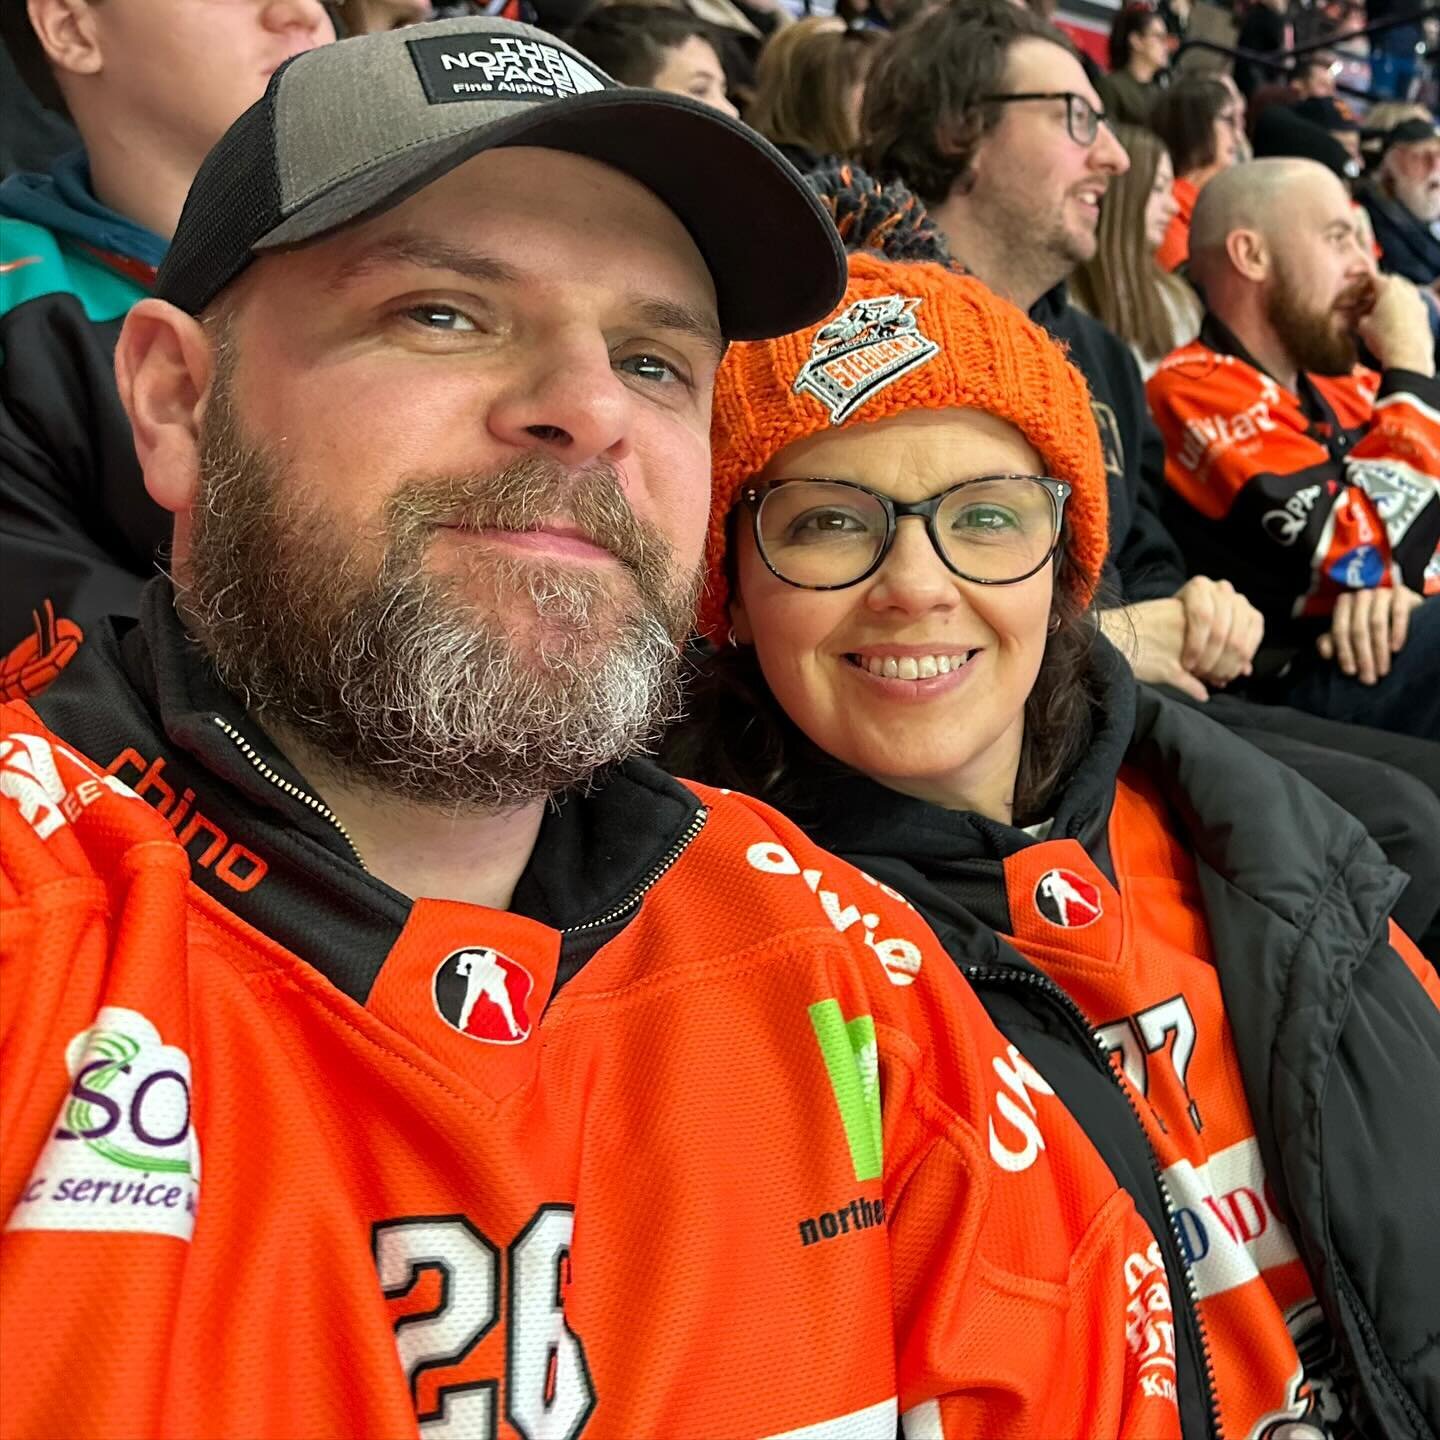 We think this is our 30th Valentine&rsquo;s Day together! Celebrating with @officialsteelers and 8,498 other people.

Sheffield Steelers 3 - 0 Guildford Flames

#BleedOrange